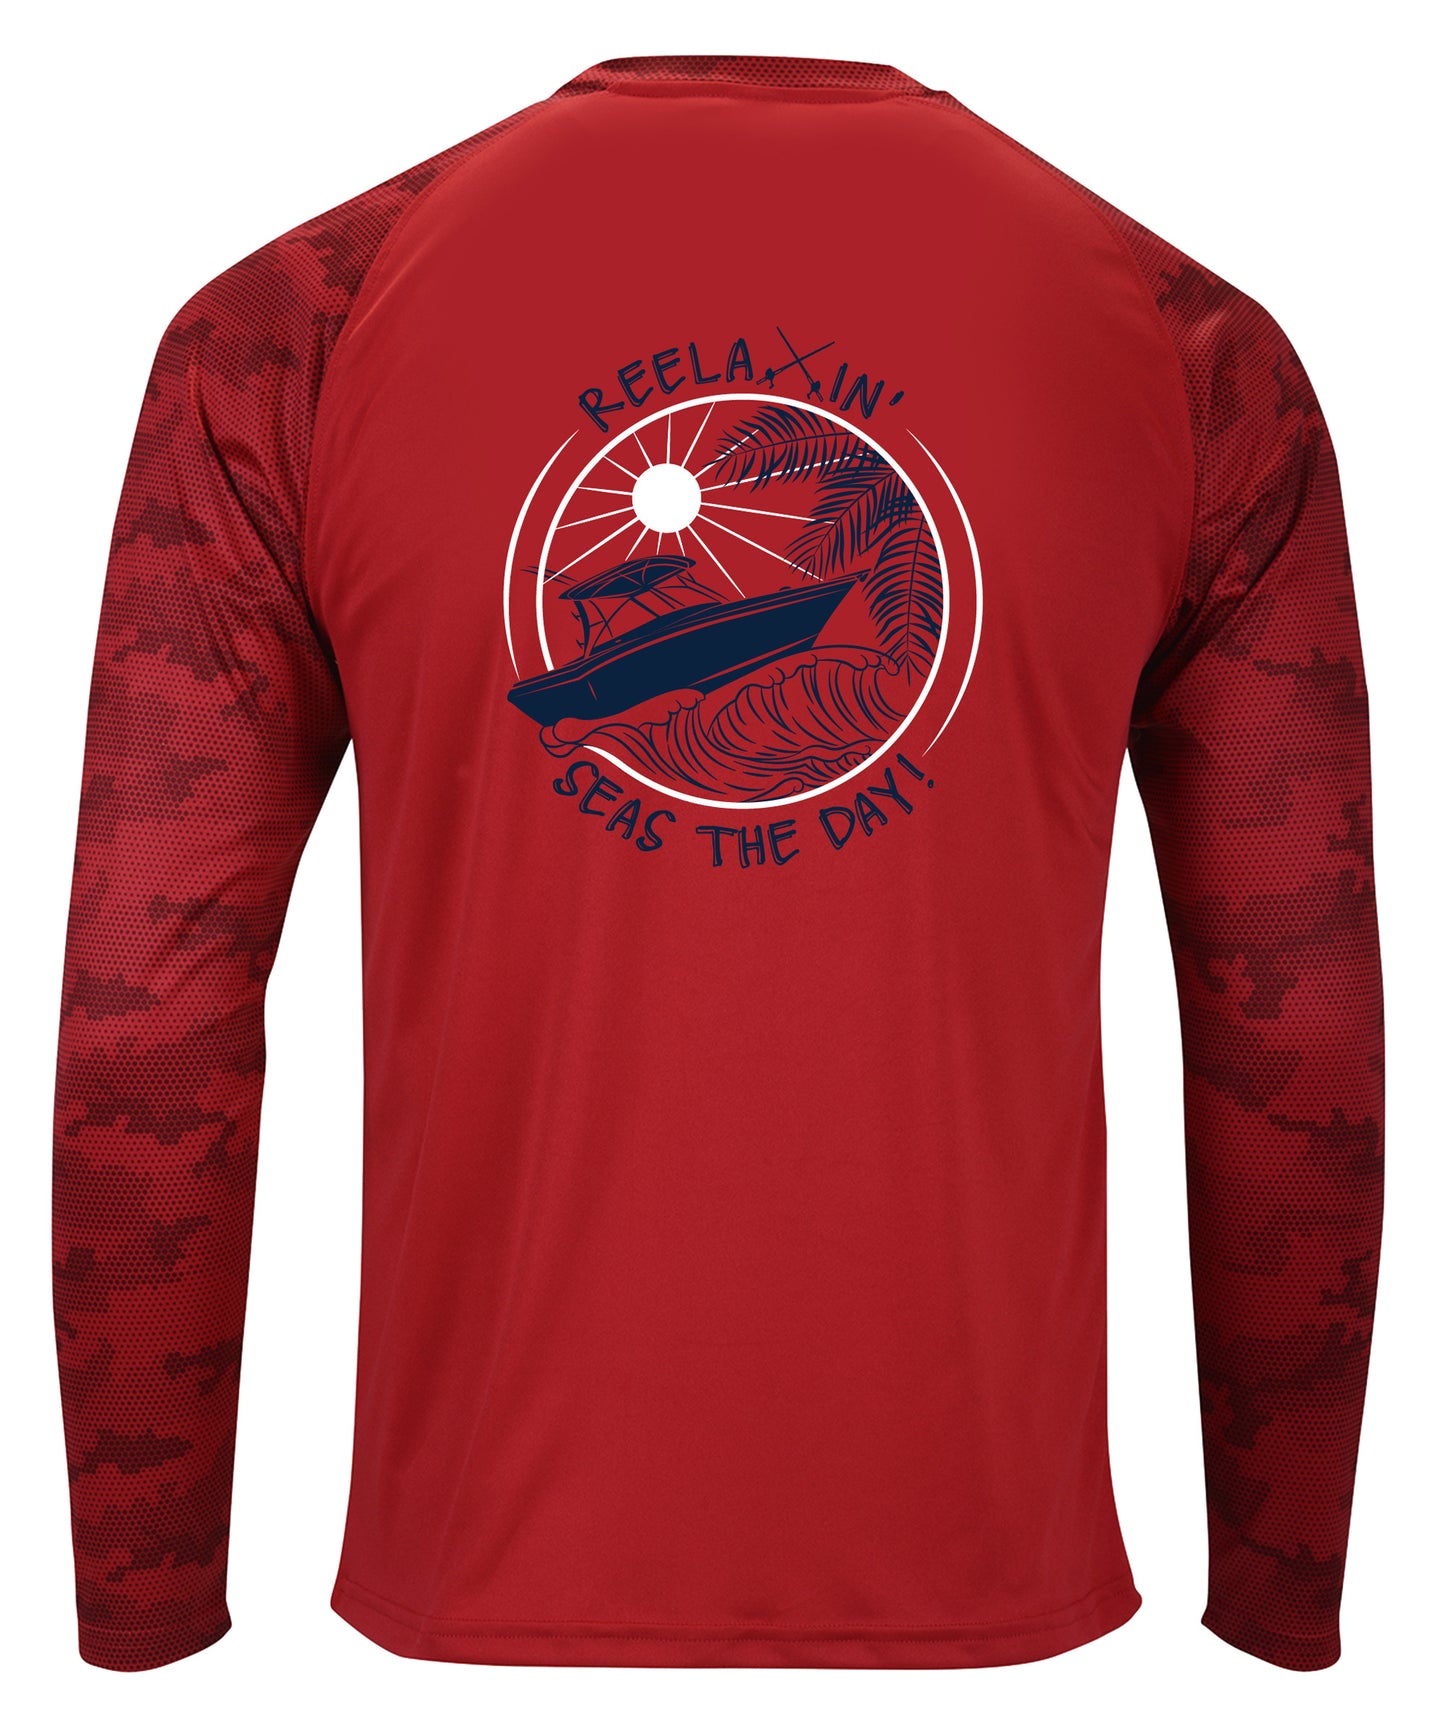 Red Reelaxin' Digital Camo Performance Dry-Fit Fishing Long Sleeve Shirts, 50+ UPF Sun Protection - Reel Fishy Apparel